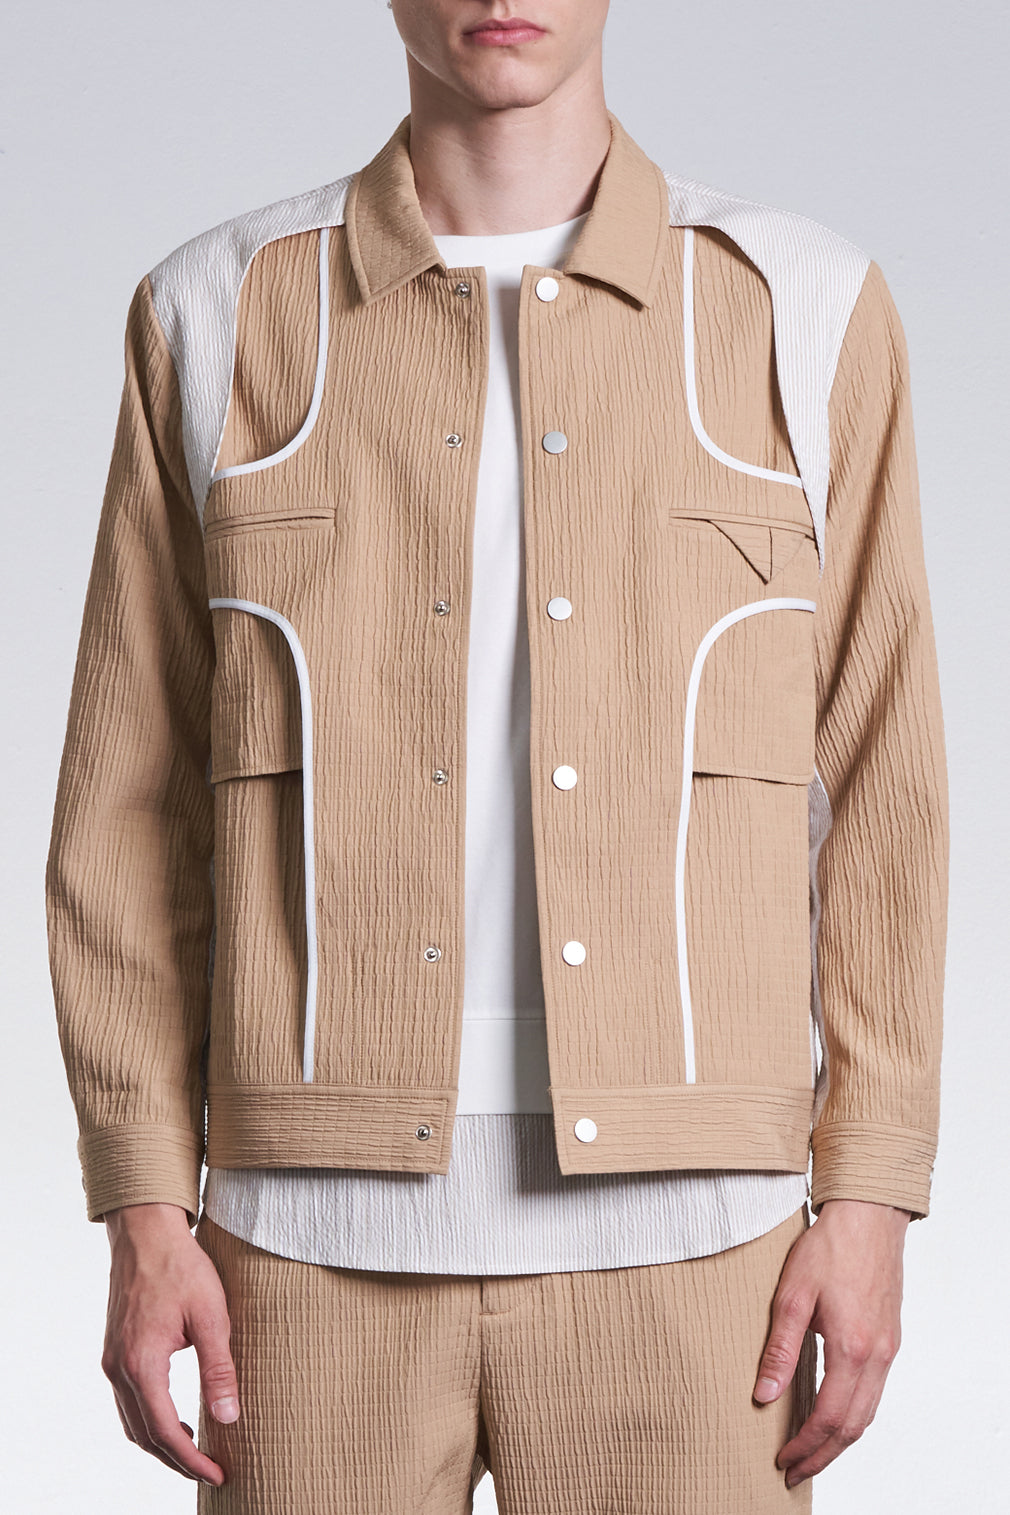 Inside Out Jacket Constructed With Stripe Fabric